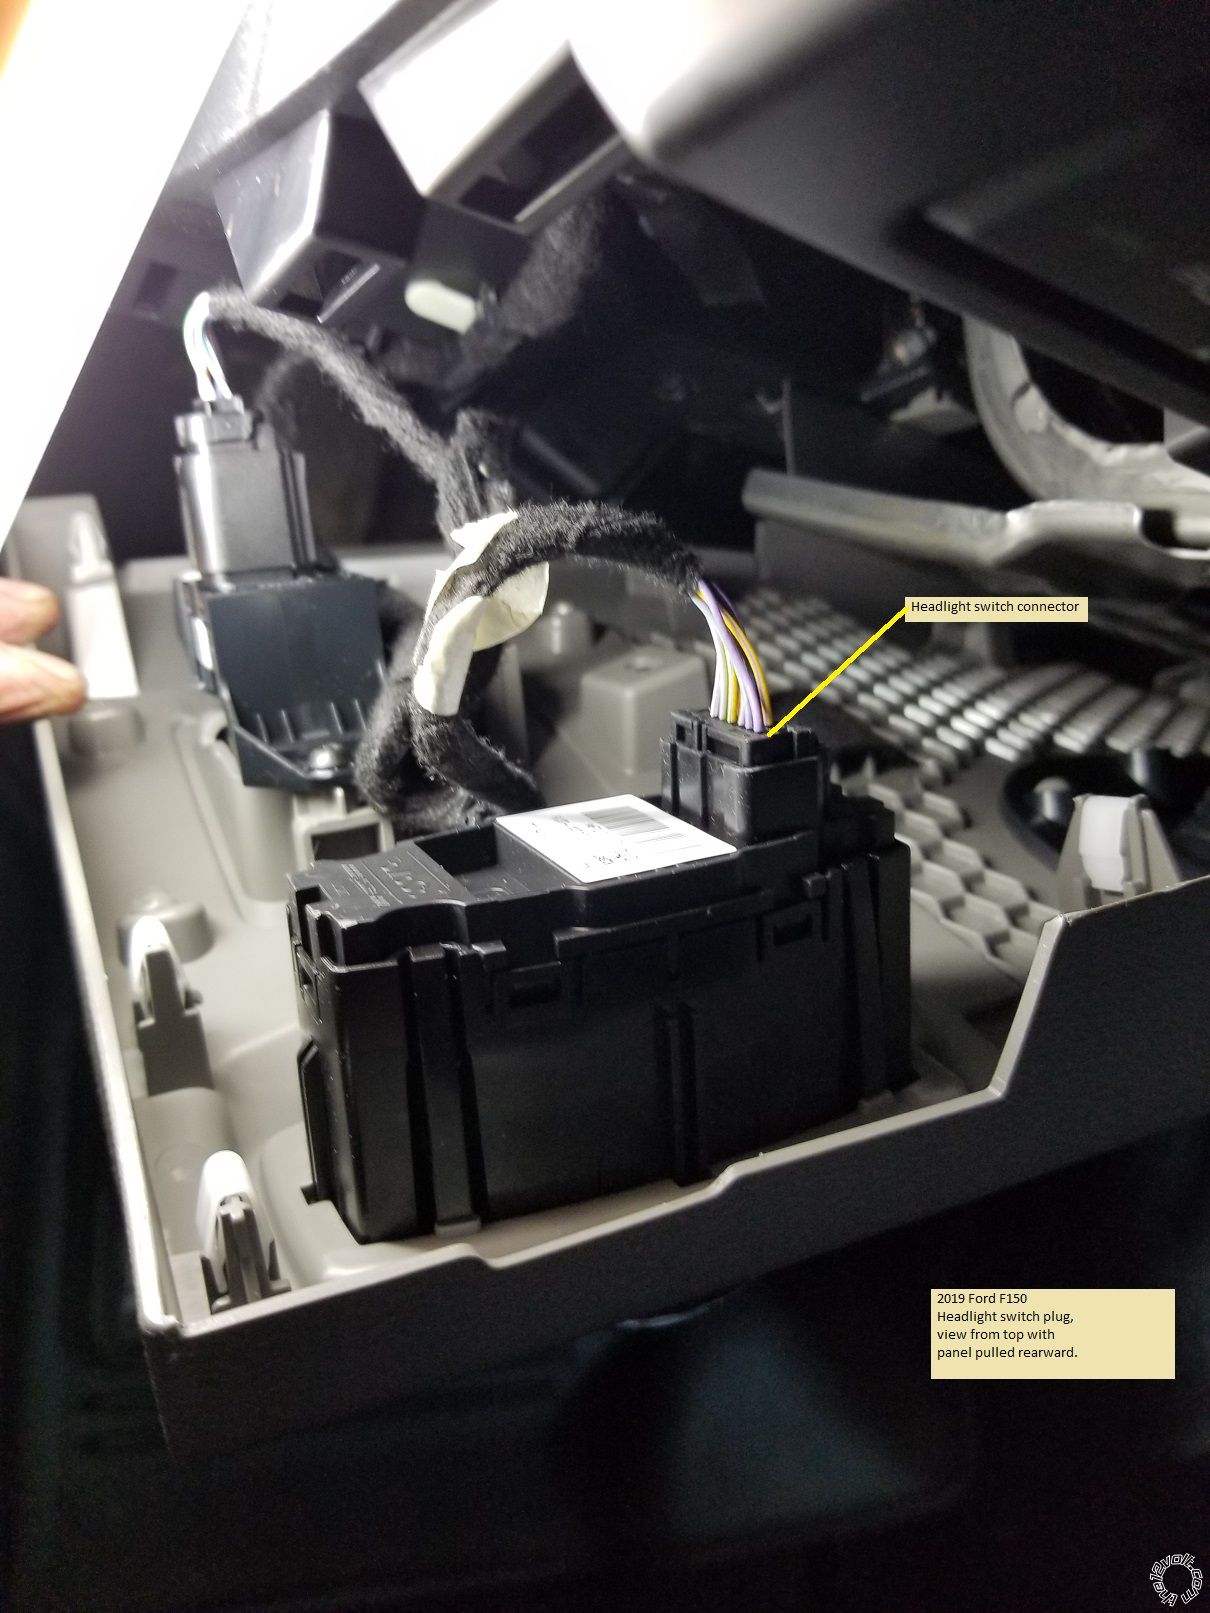 2015-2019 Ford F-150 Stand Alone Remote Start Pictorial - Last Post -- posted image.